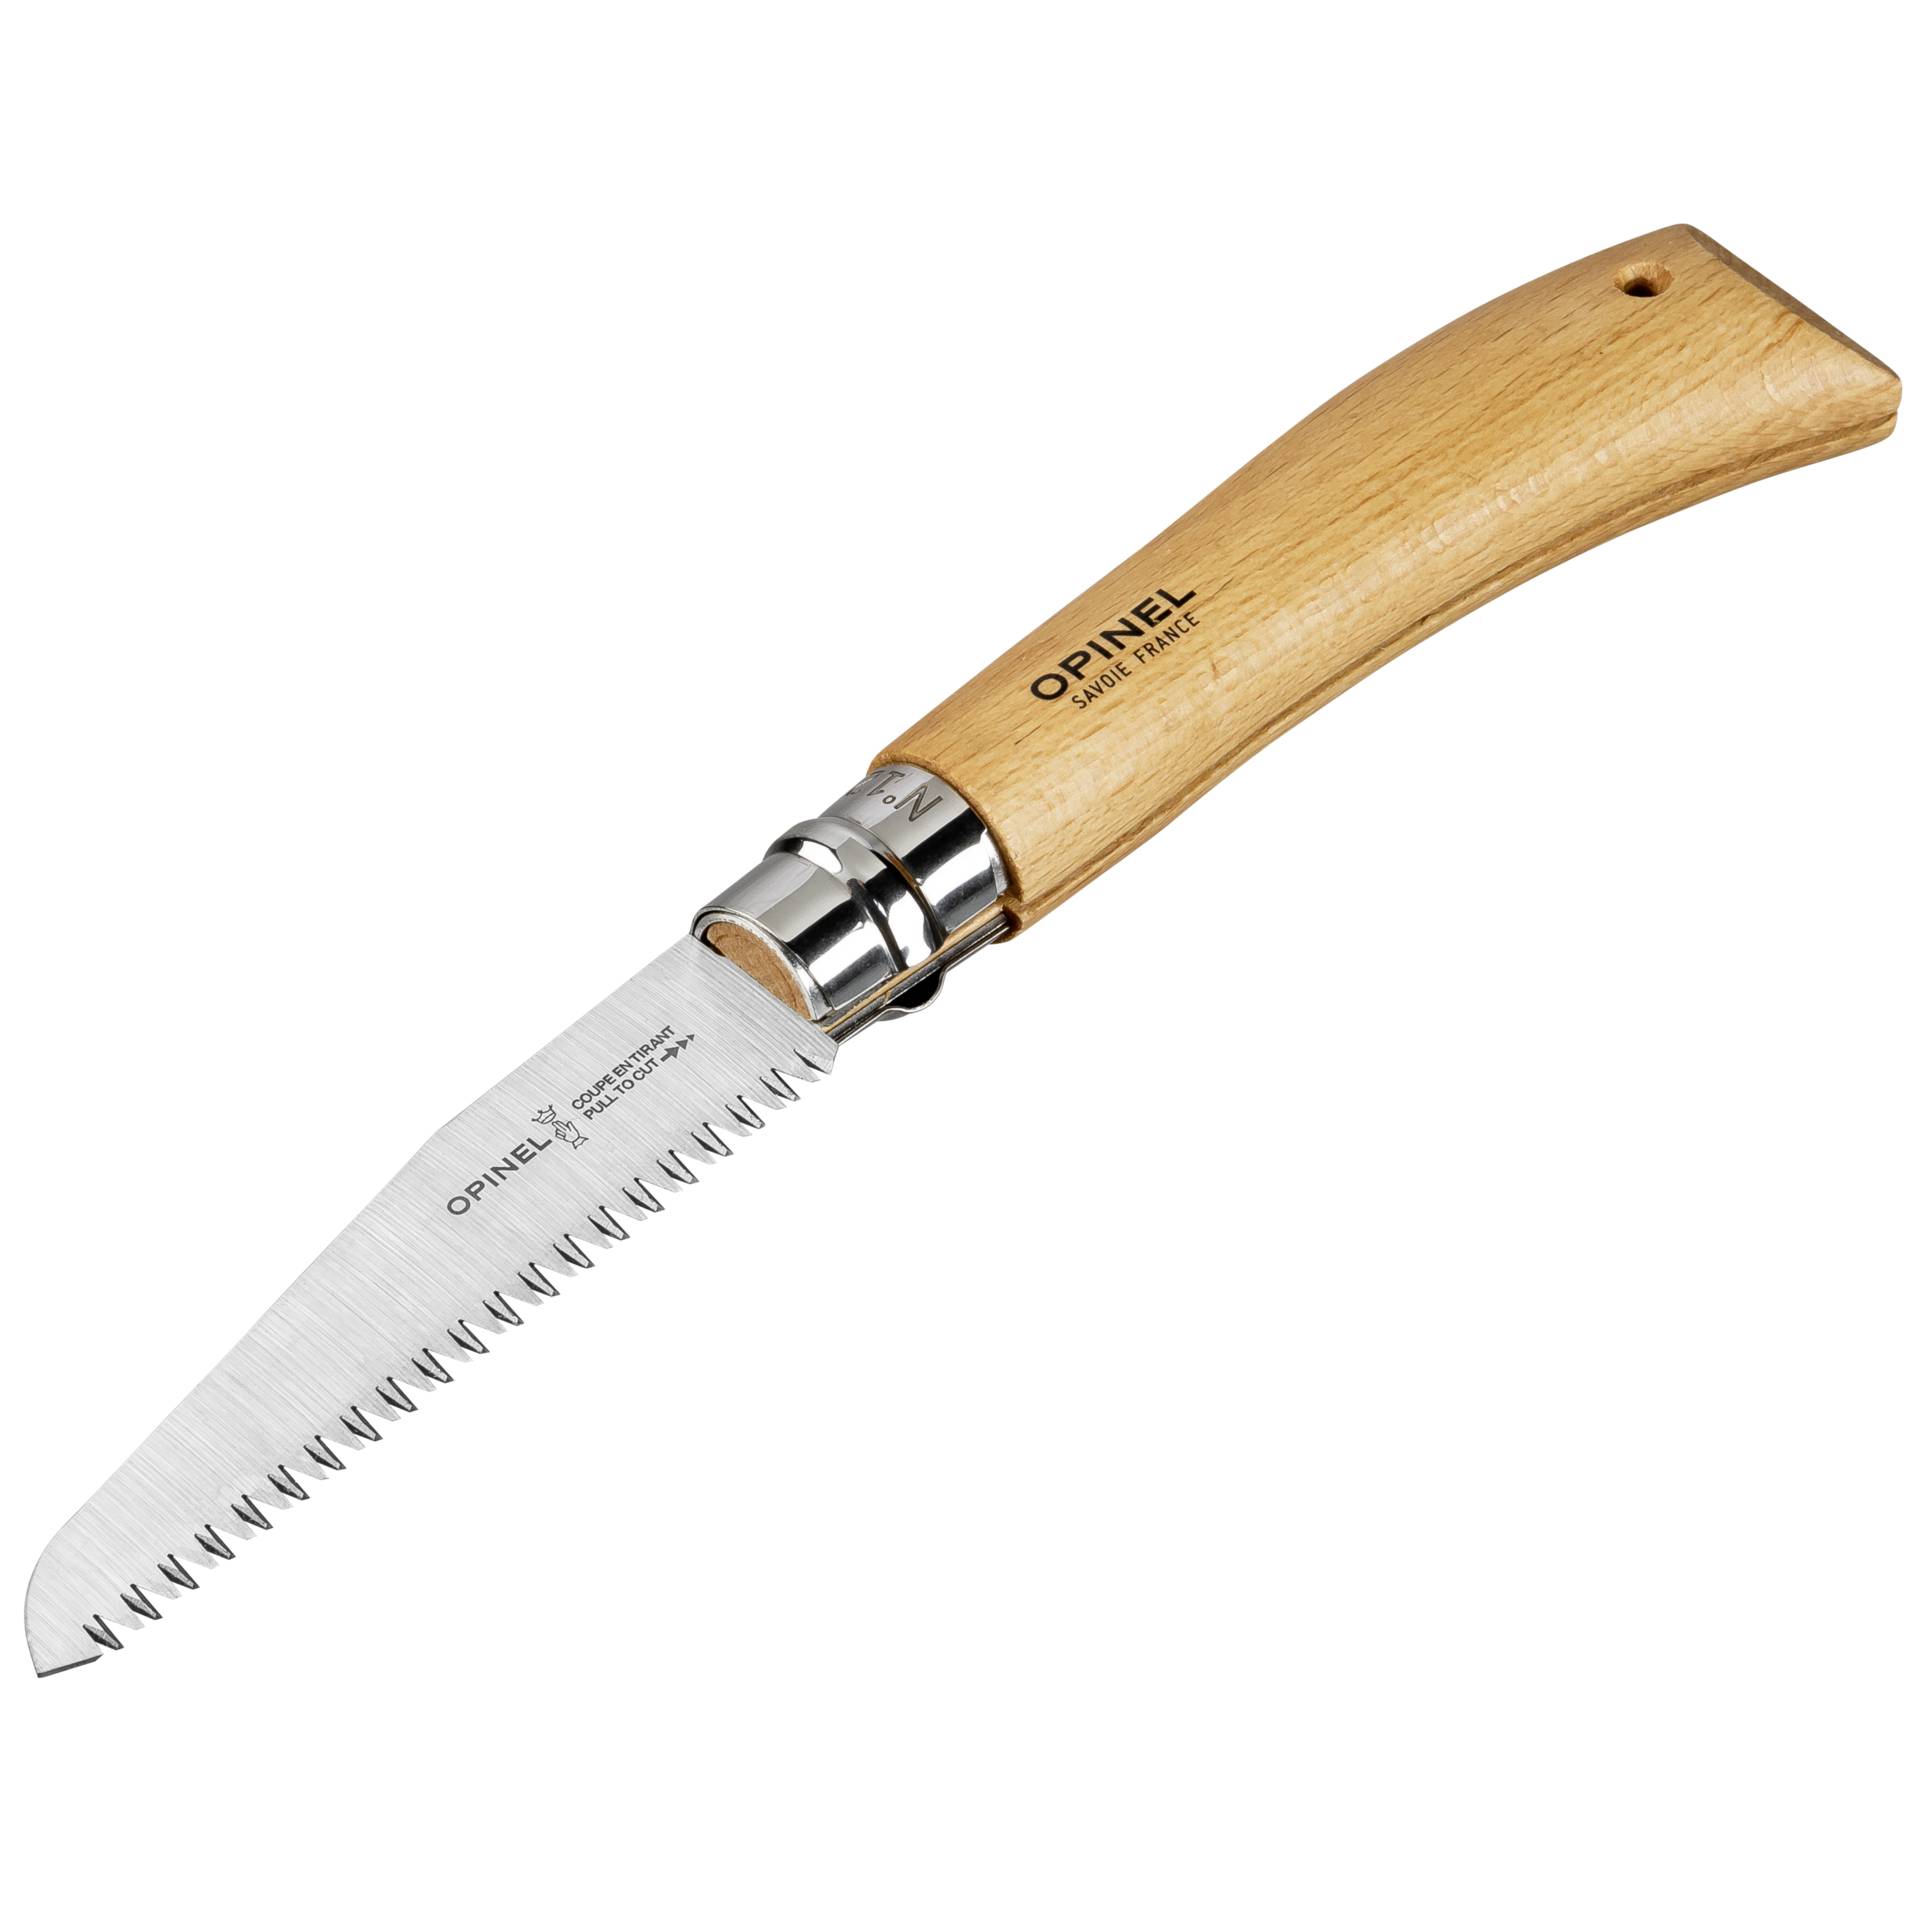 Opinel No. 12 Saw